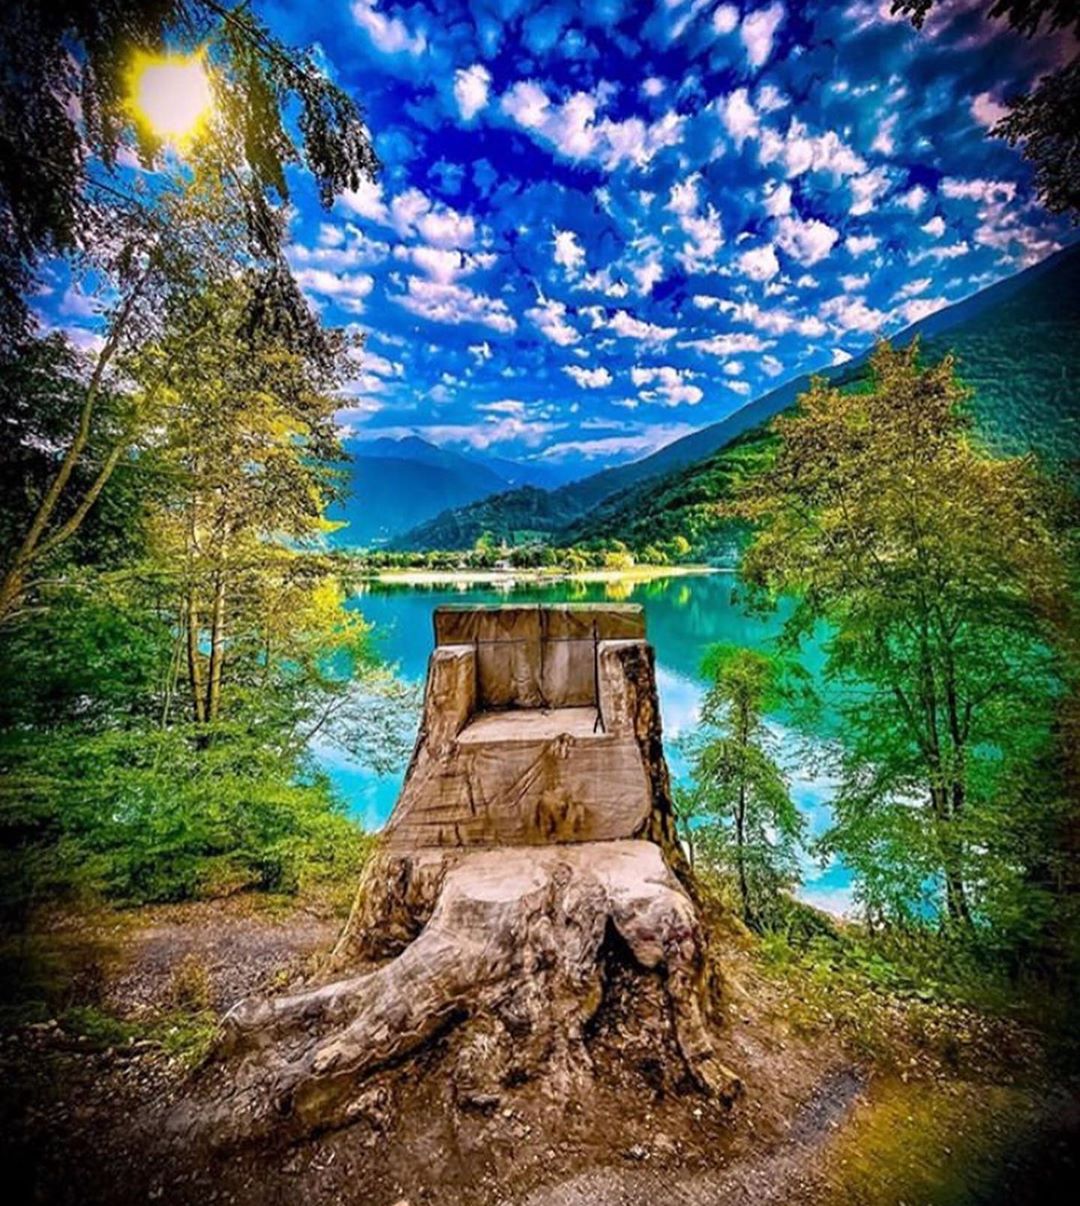 Perlier USA - Virtually vacationing in magical #trentino this #wanderlustwednesday 

.
.

#perlierusa #italianbeauty 
.
📸 #1 @tobiazanolli 
📸#2 @iwa_girl 
📸#3 @ely_111 
📸 #4 @cangia 
📸#5 @pacifico.mir...